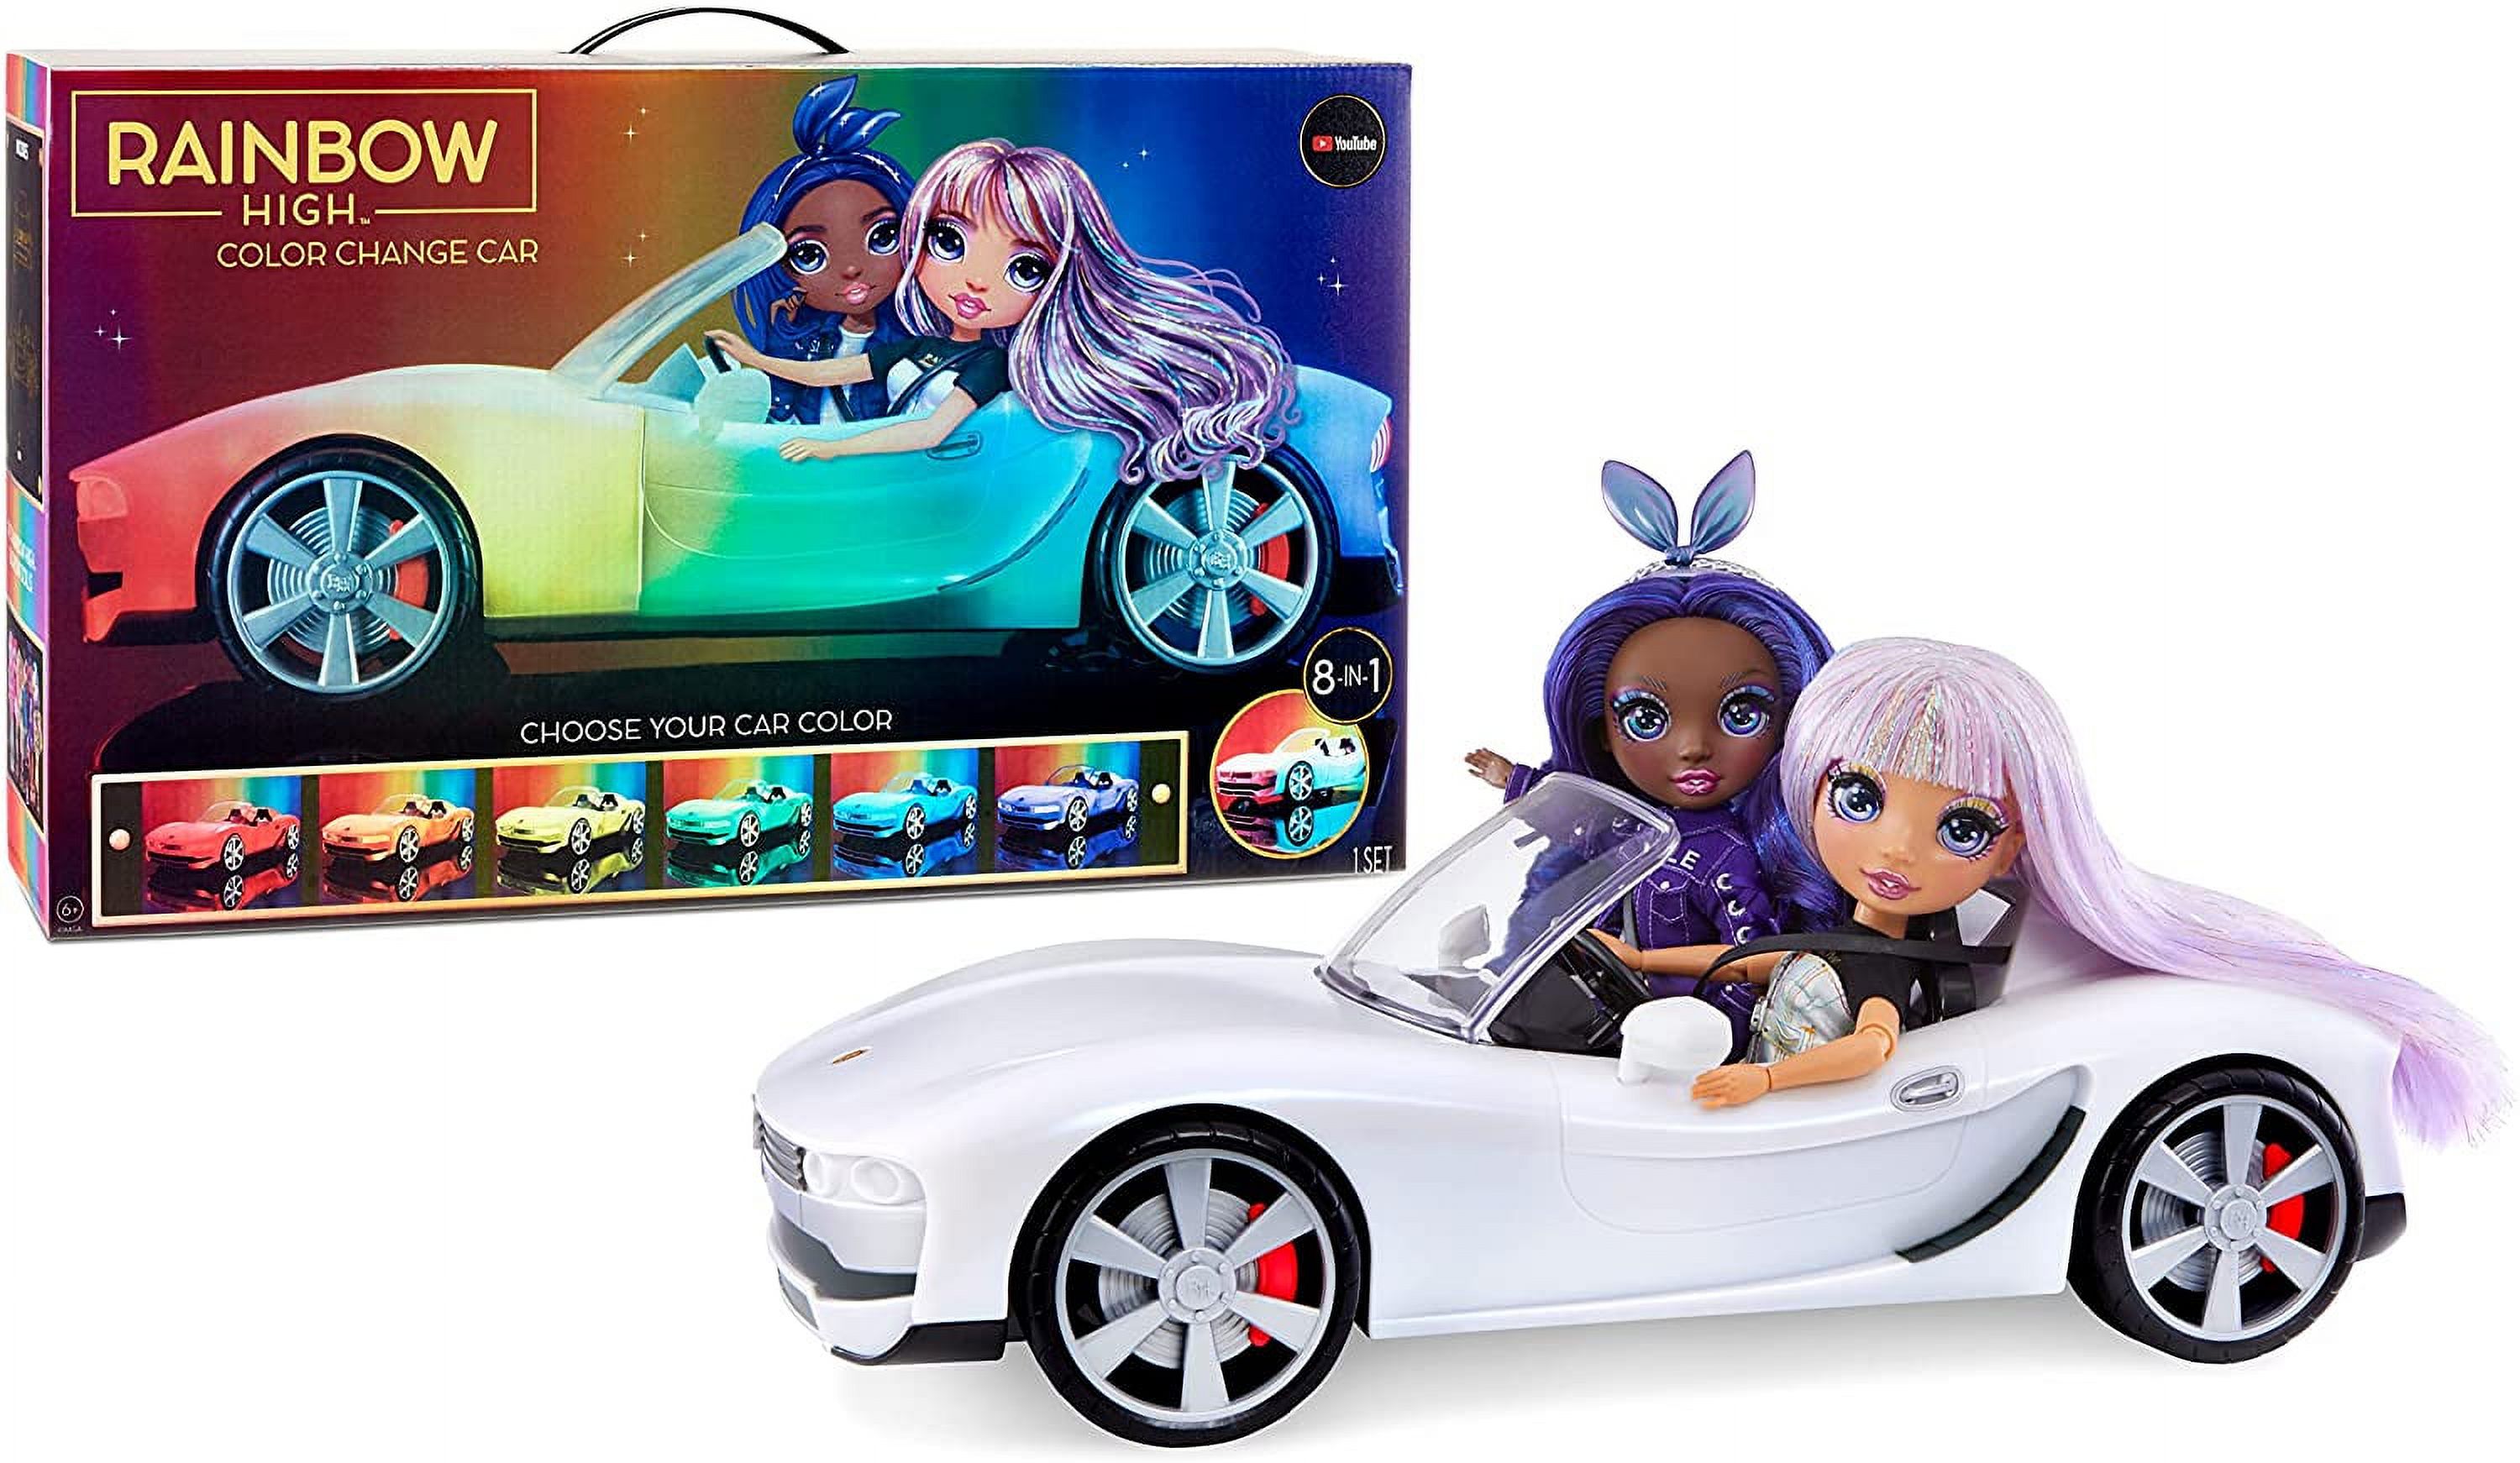 Rainbow High Color Change Car - Convertible Vehicle, 8-In-1 Light-Up, Multicolor, Fits 2 Fashion Dolls- Great Toy Gift for Girls Ages 6-12+ - image 4 of 10